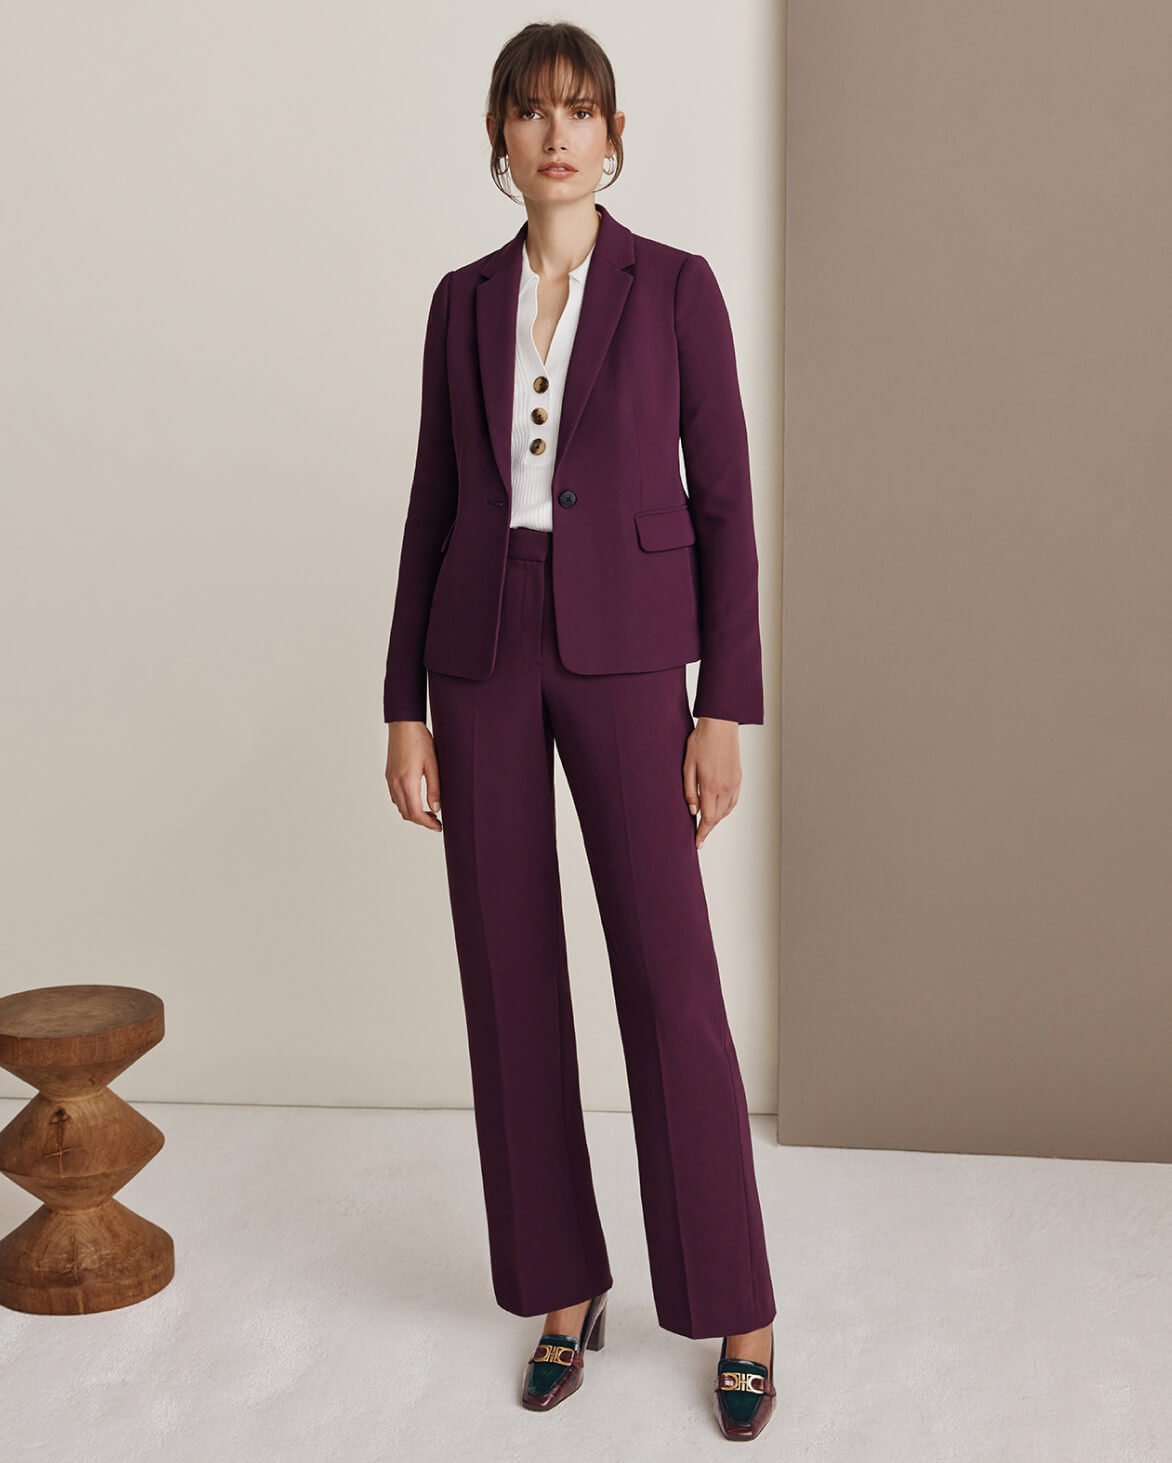 Model photographed against a neutral backdrop wearing a Hobbs burgundy suit with matching coat draped on her shoulders.